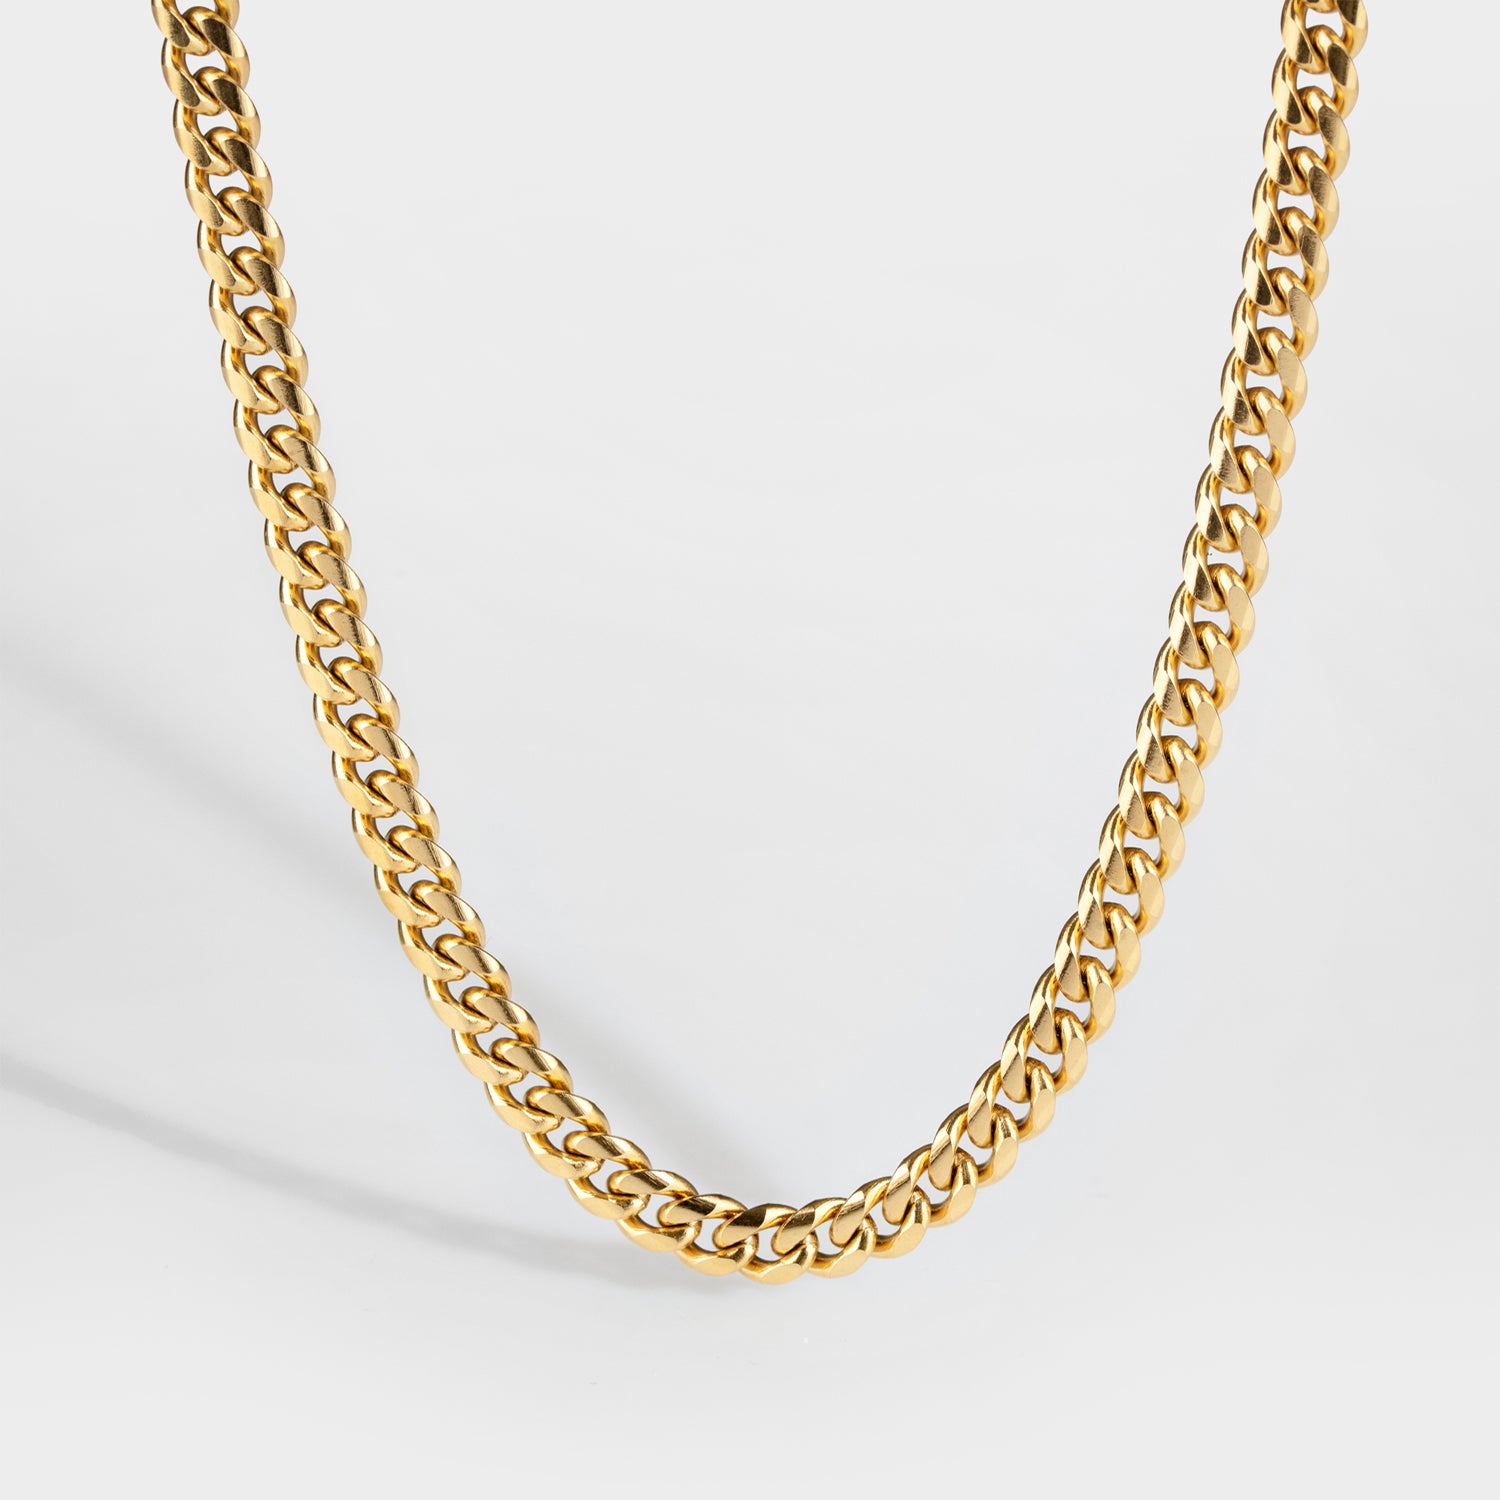 NL Sequence necklace - Gold-toned